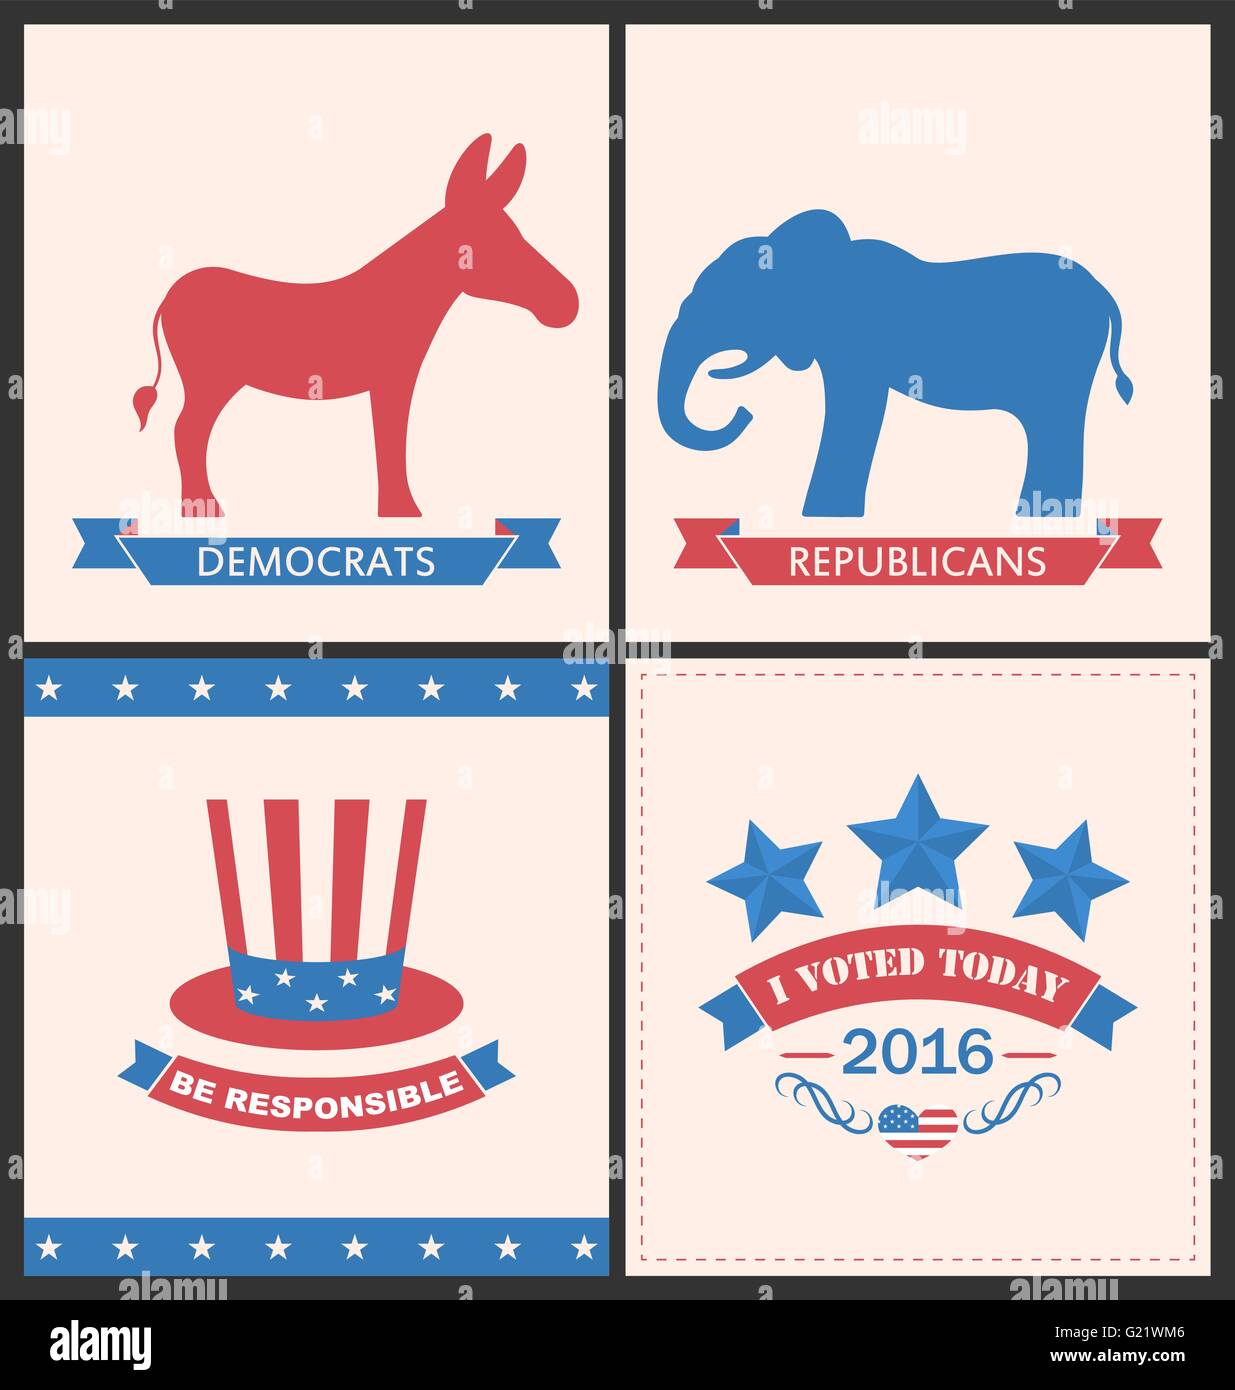 Retro Cards for Advertise of United States Political Parties Stock Vector